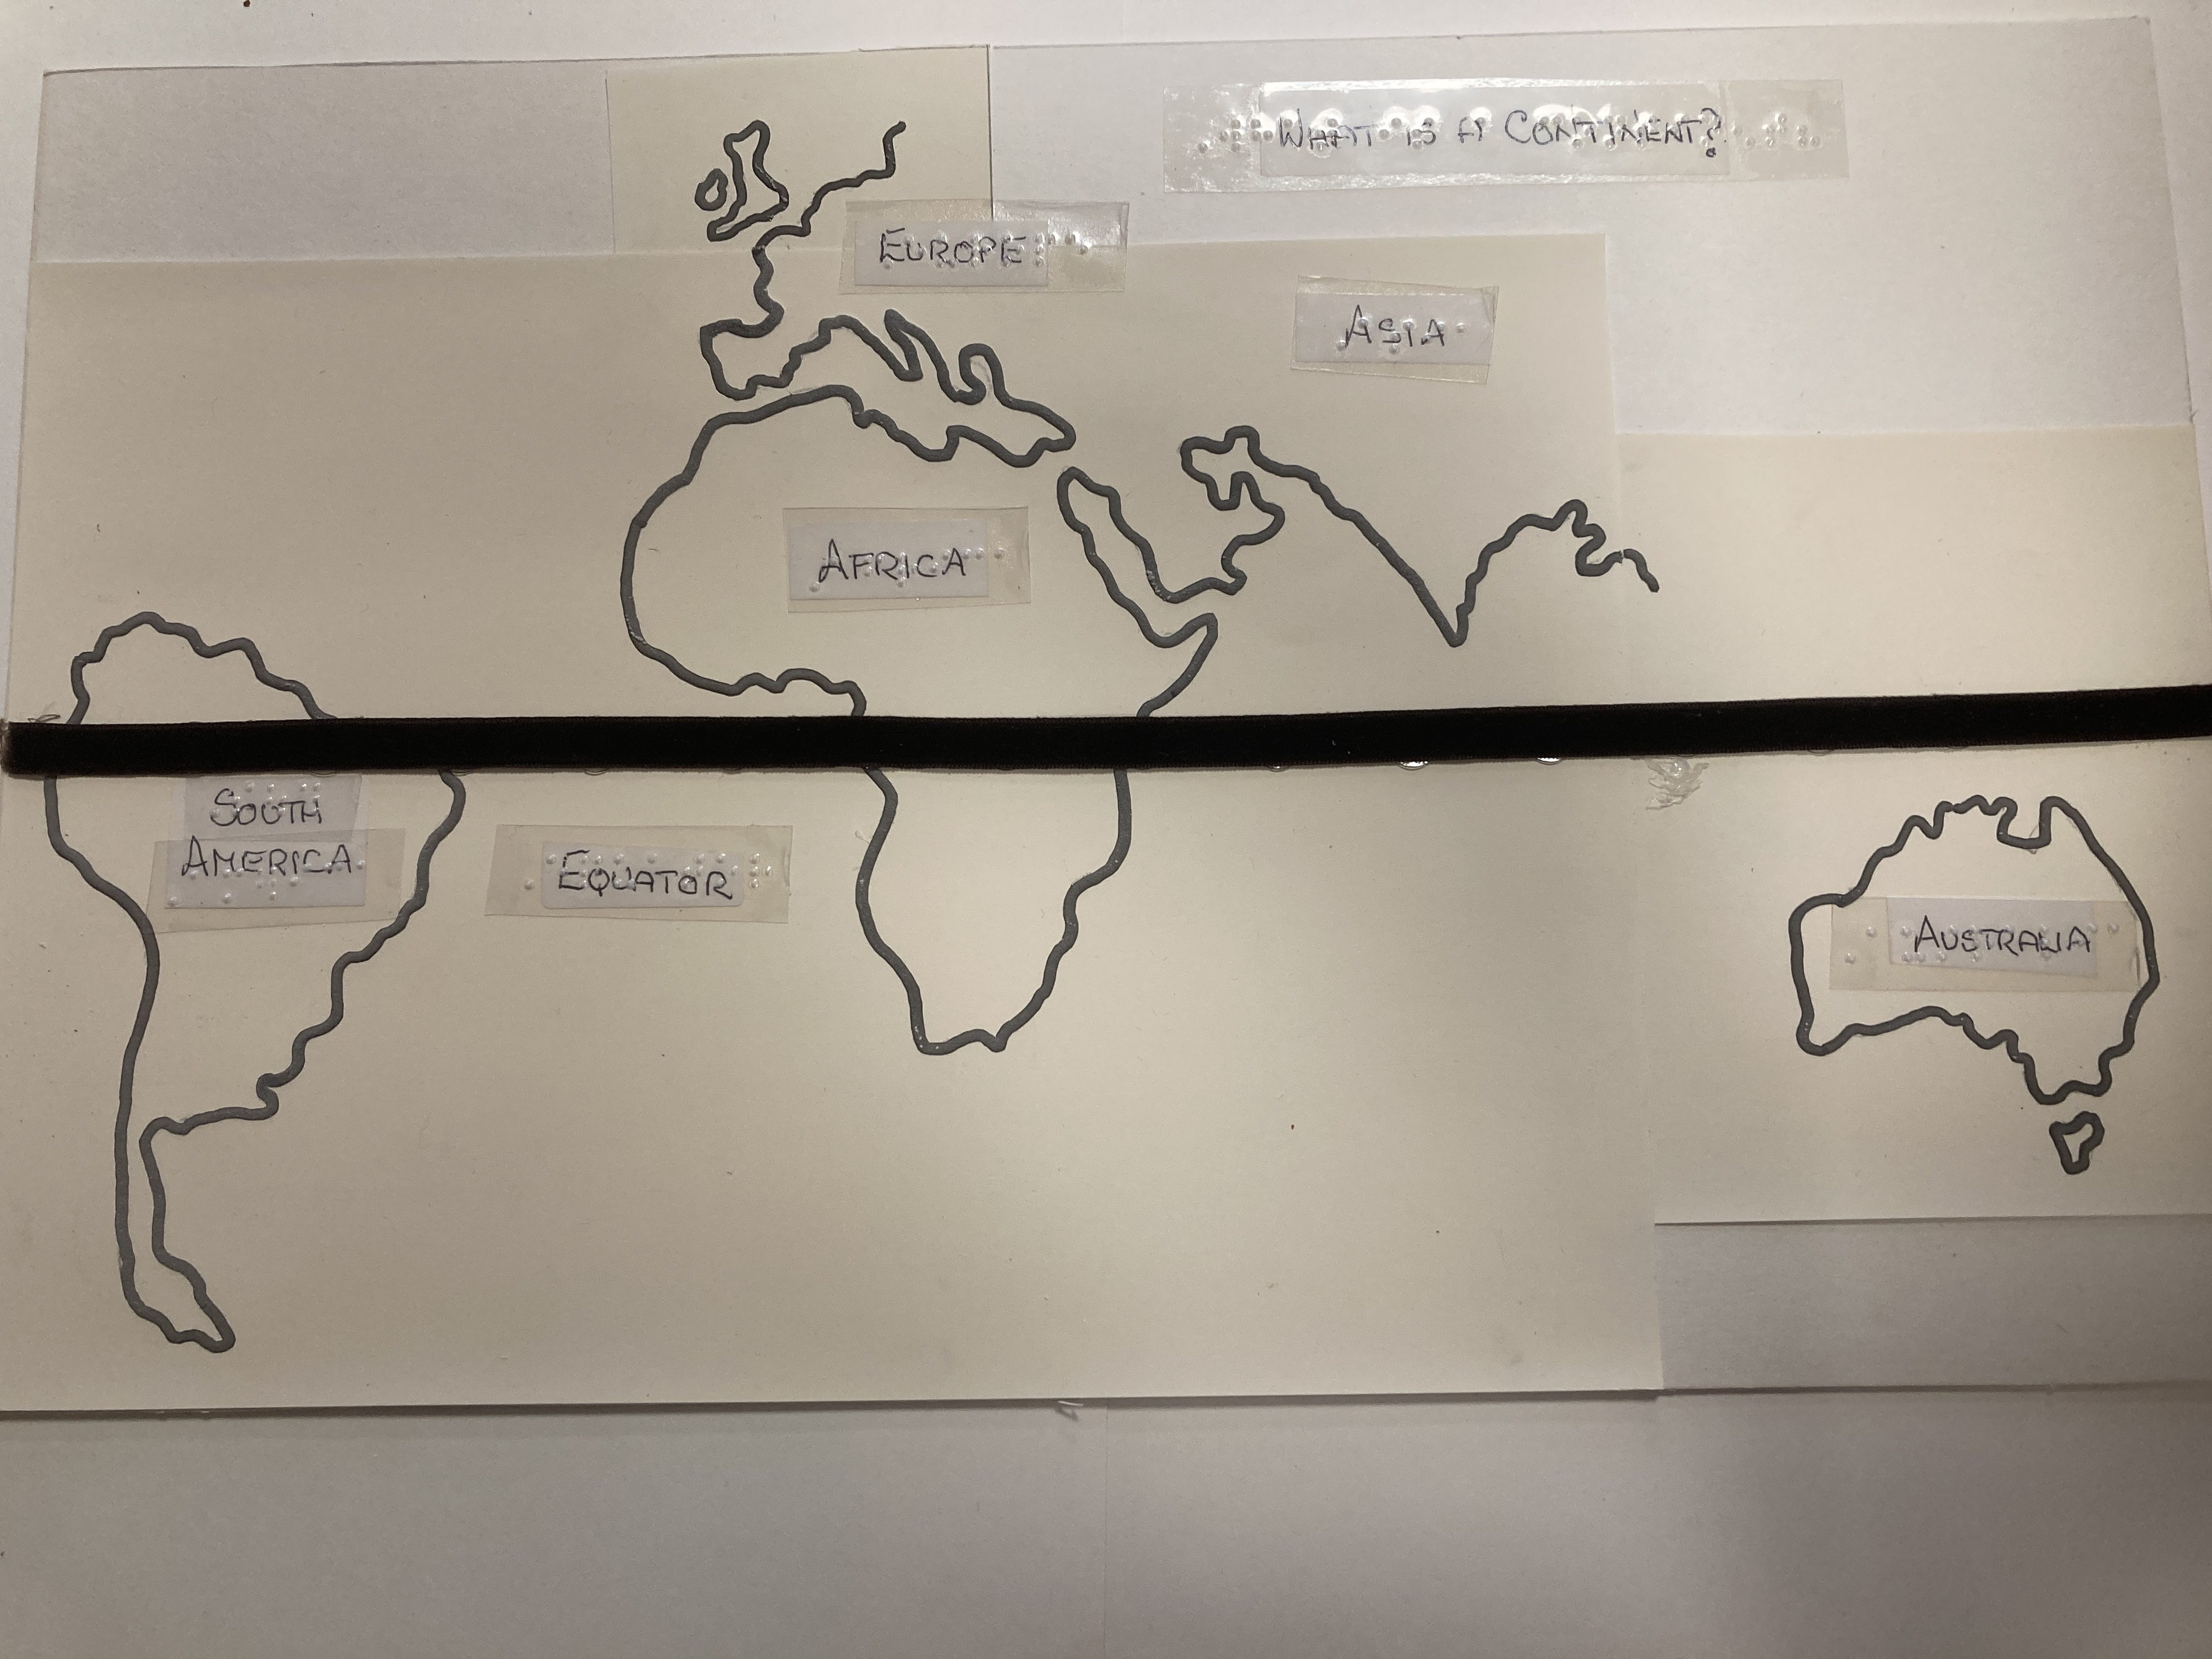 Continents and Equator